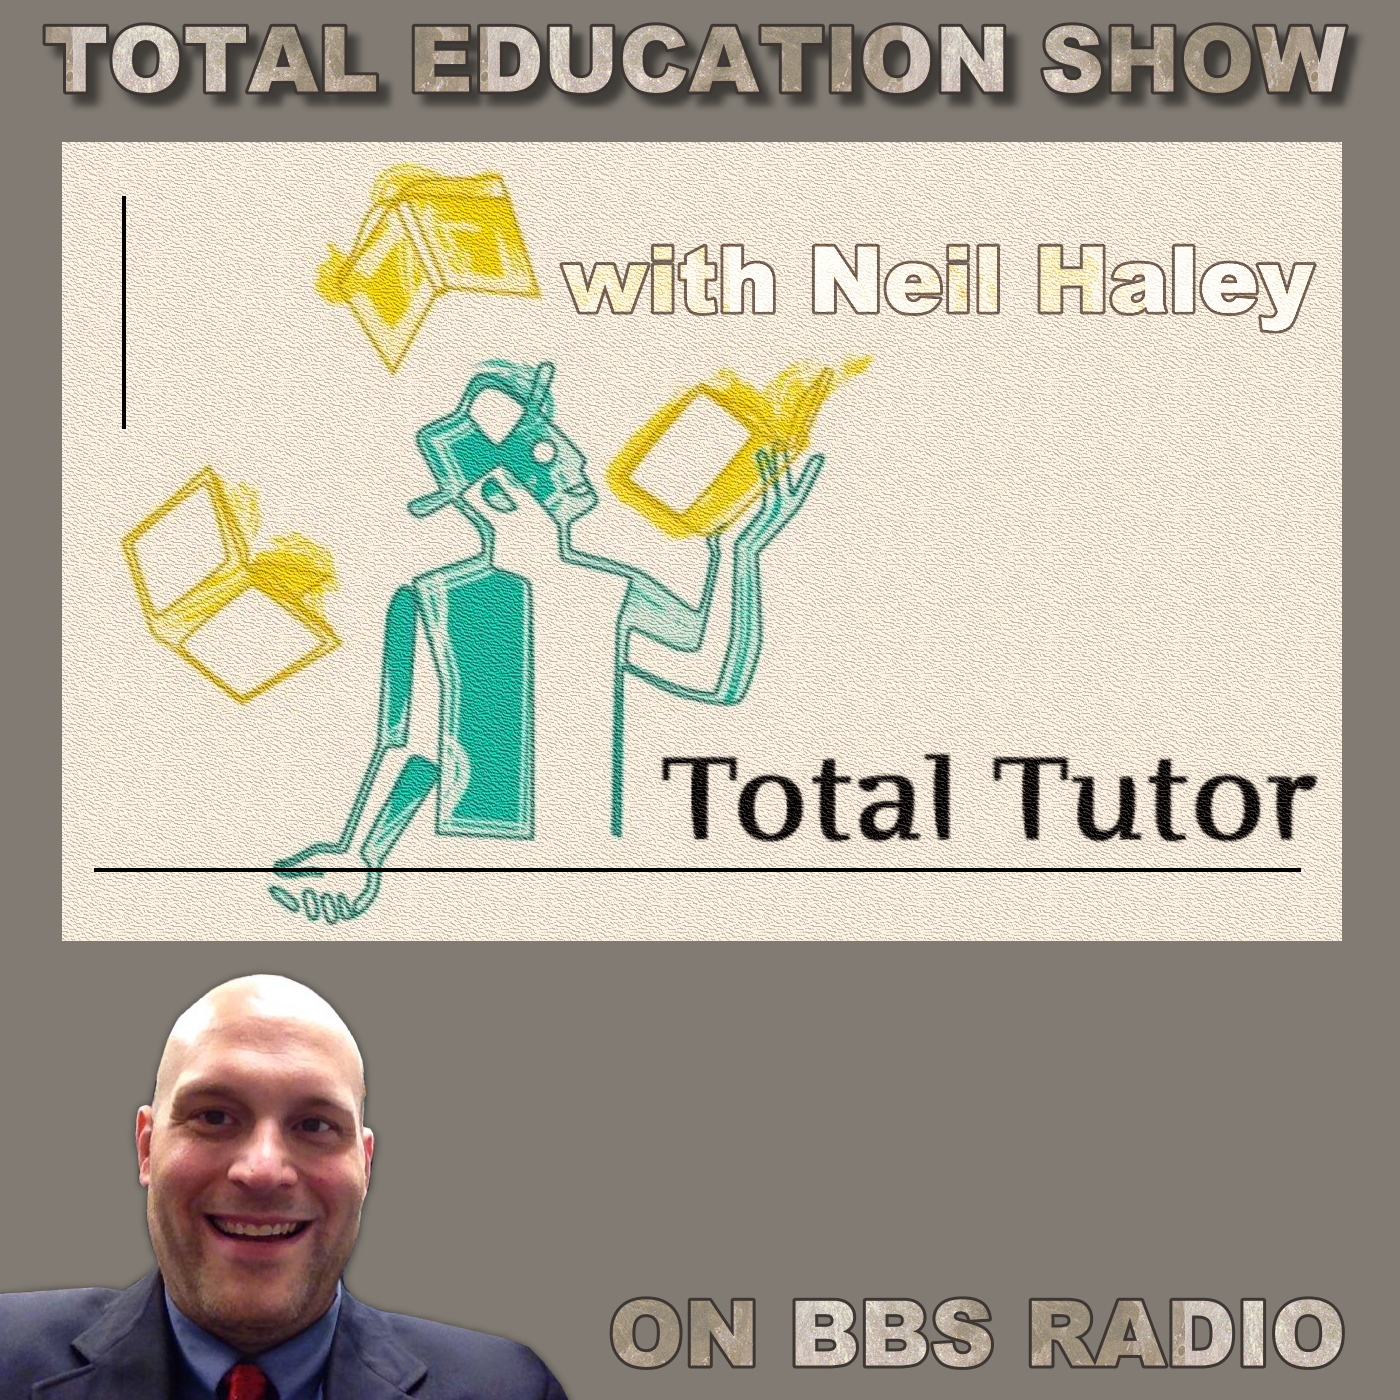 Total Education Show with Neil Haley RSS Feed:BBS Radio, BBS Network Inc.